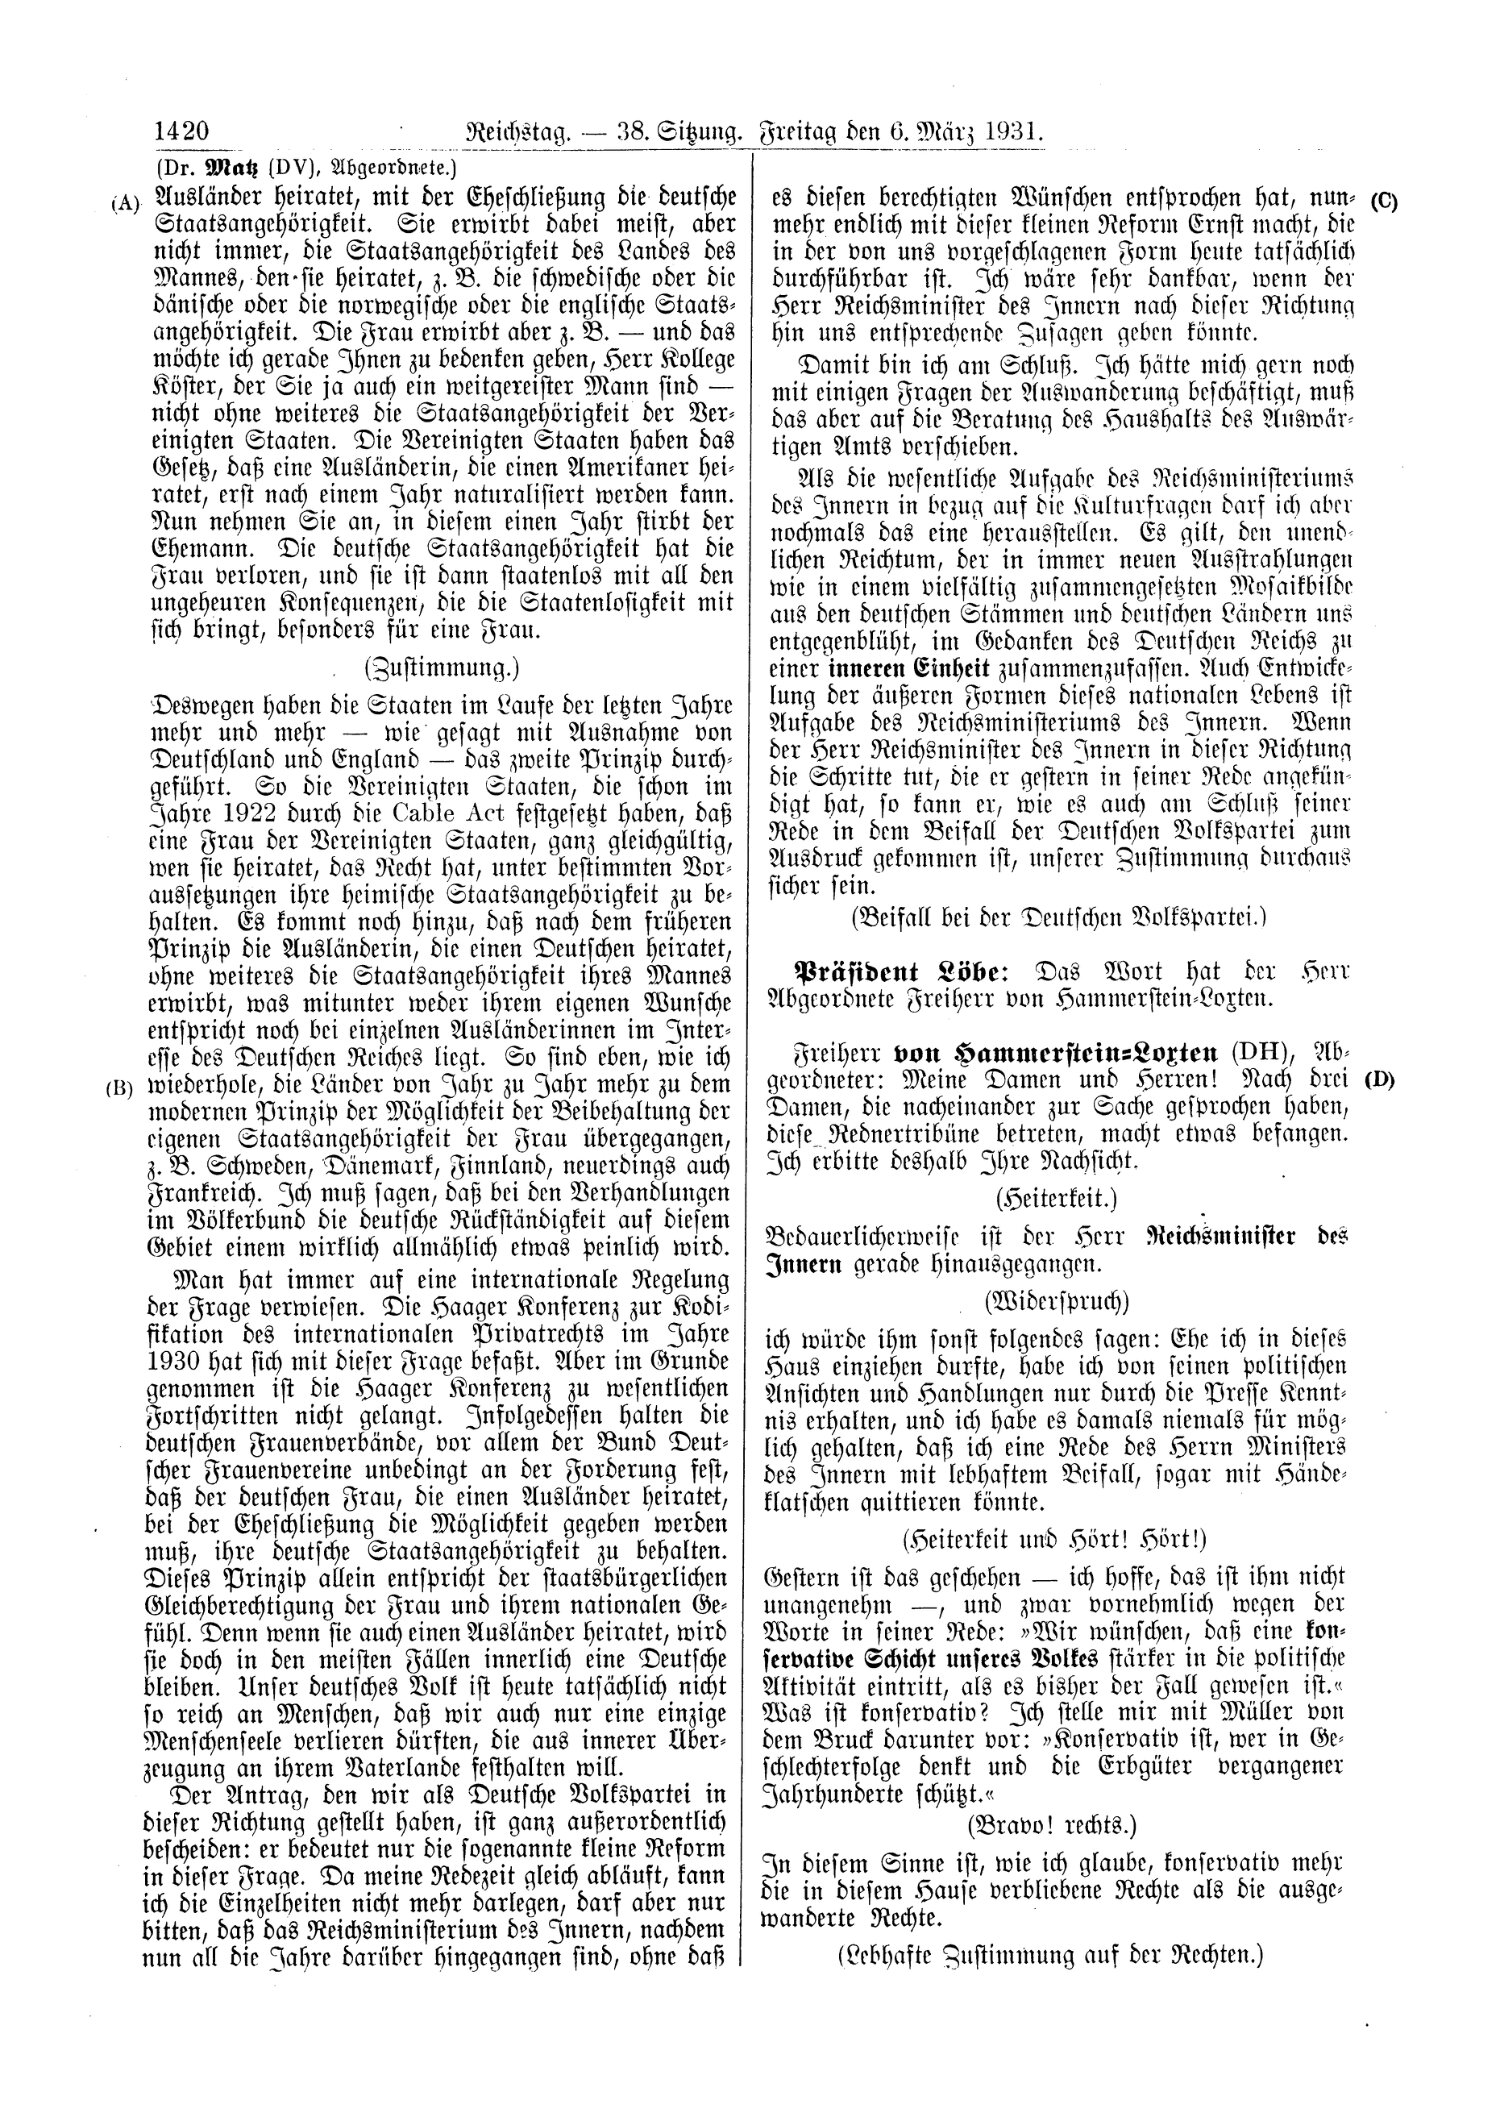 Scan of page 1420